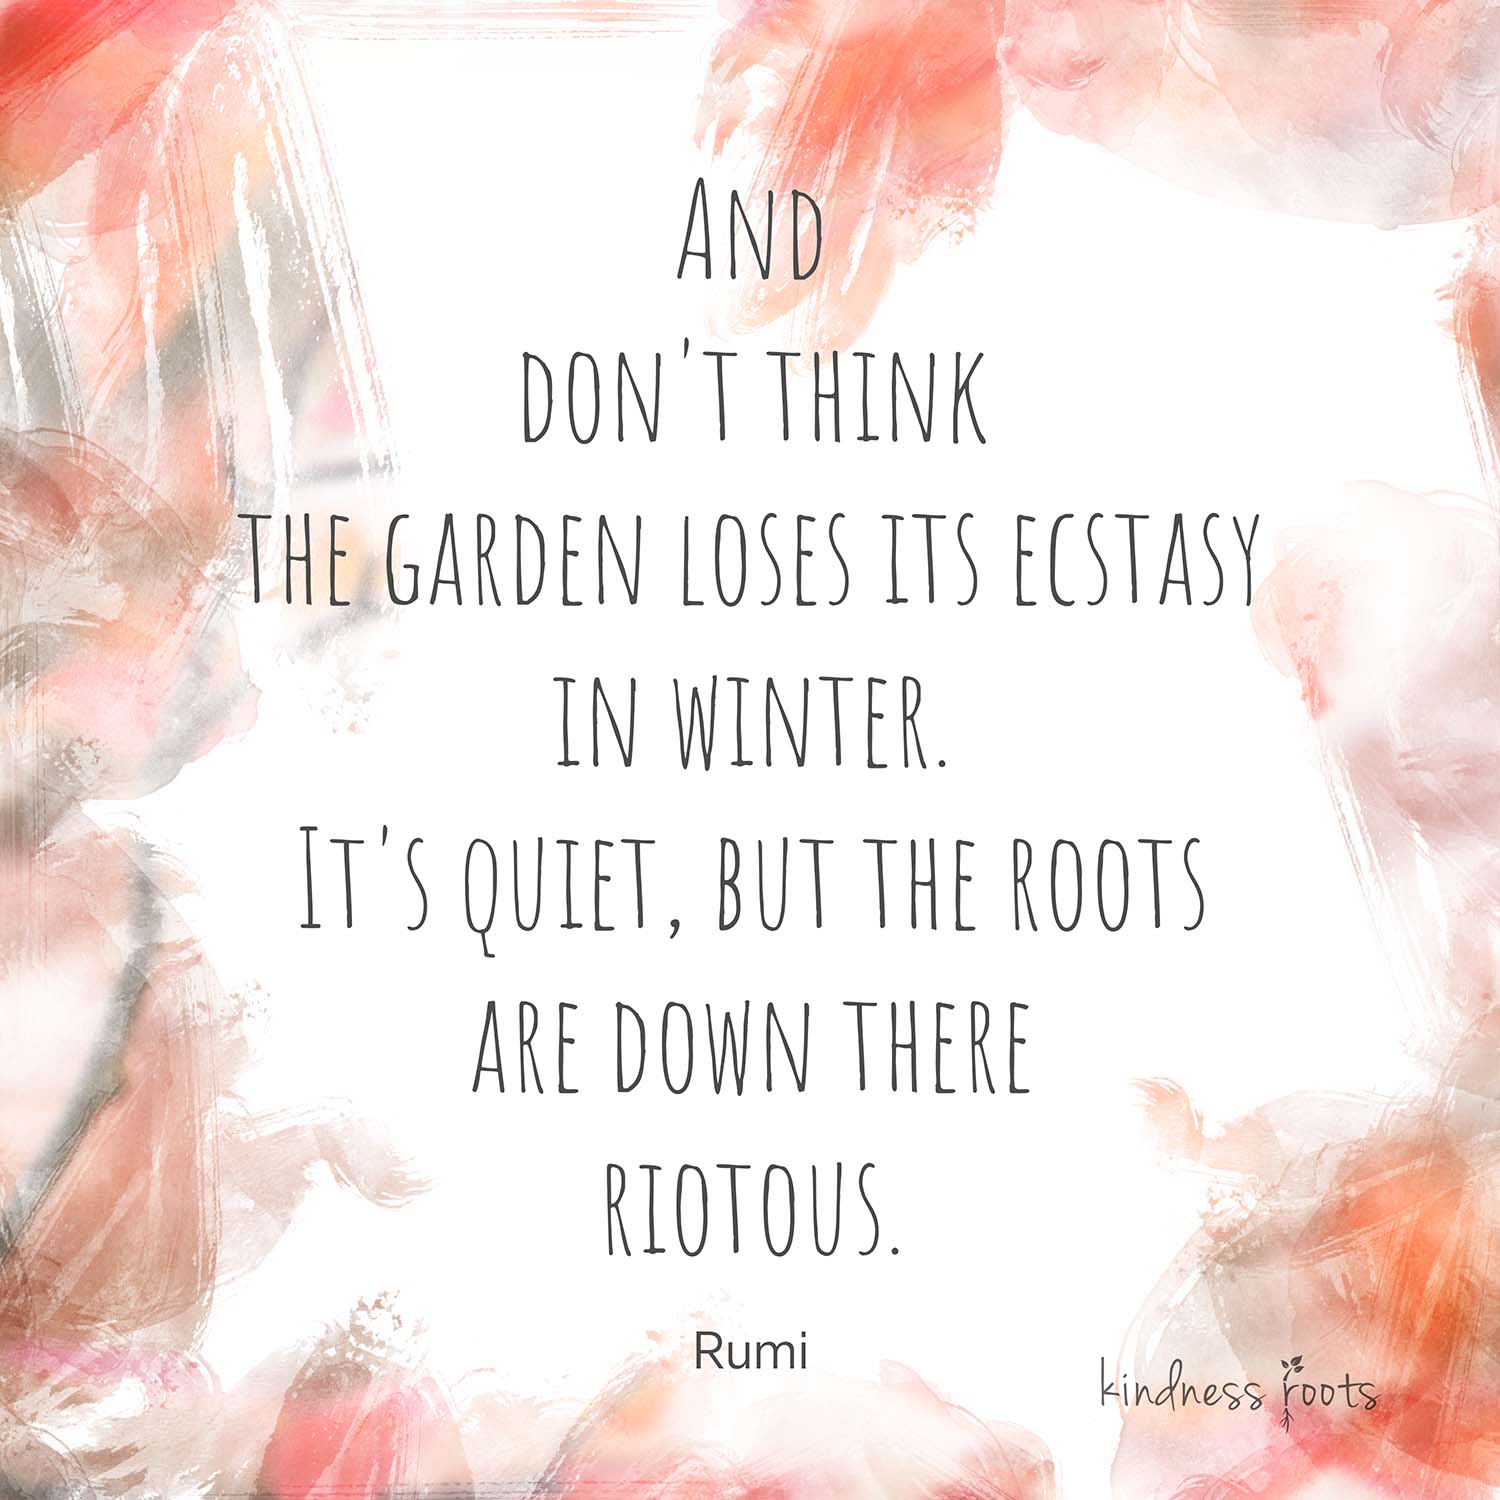 Rumi quote about riotous roots